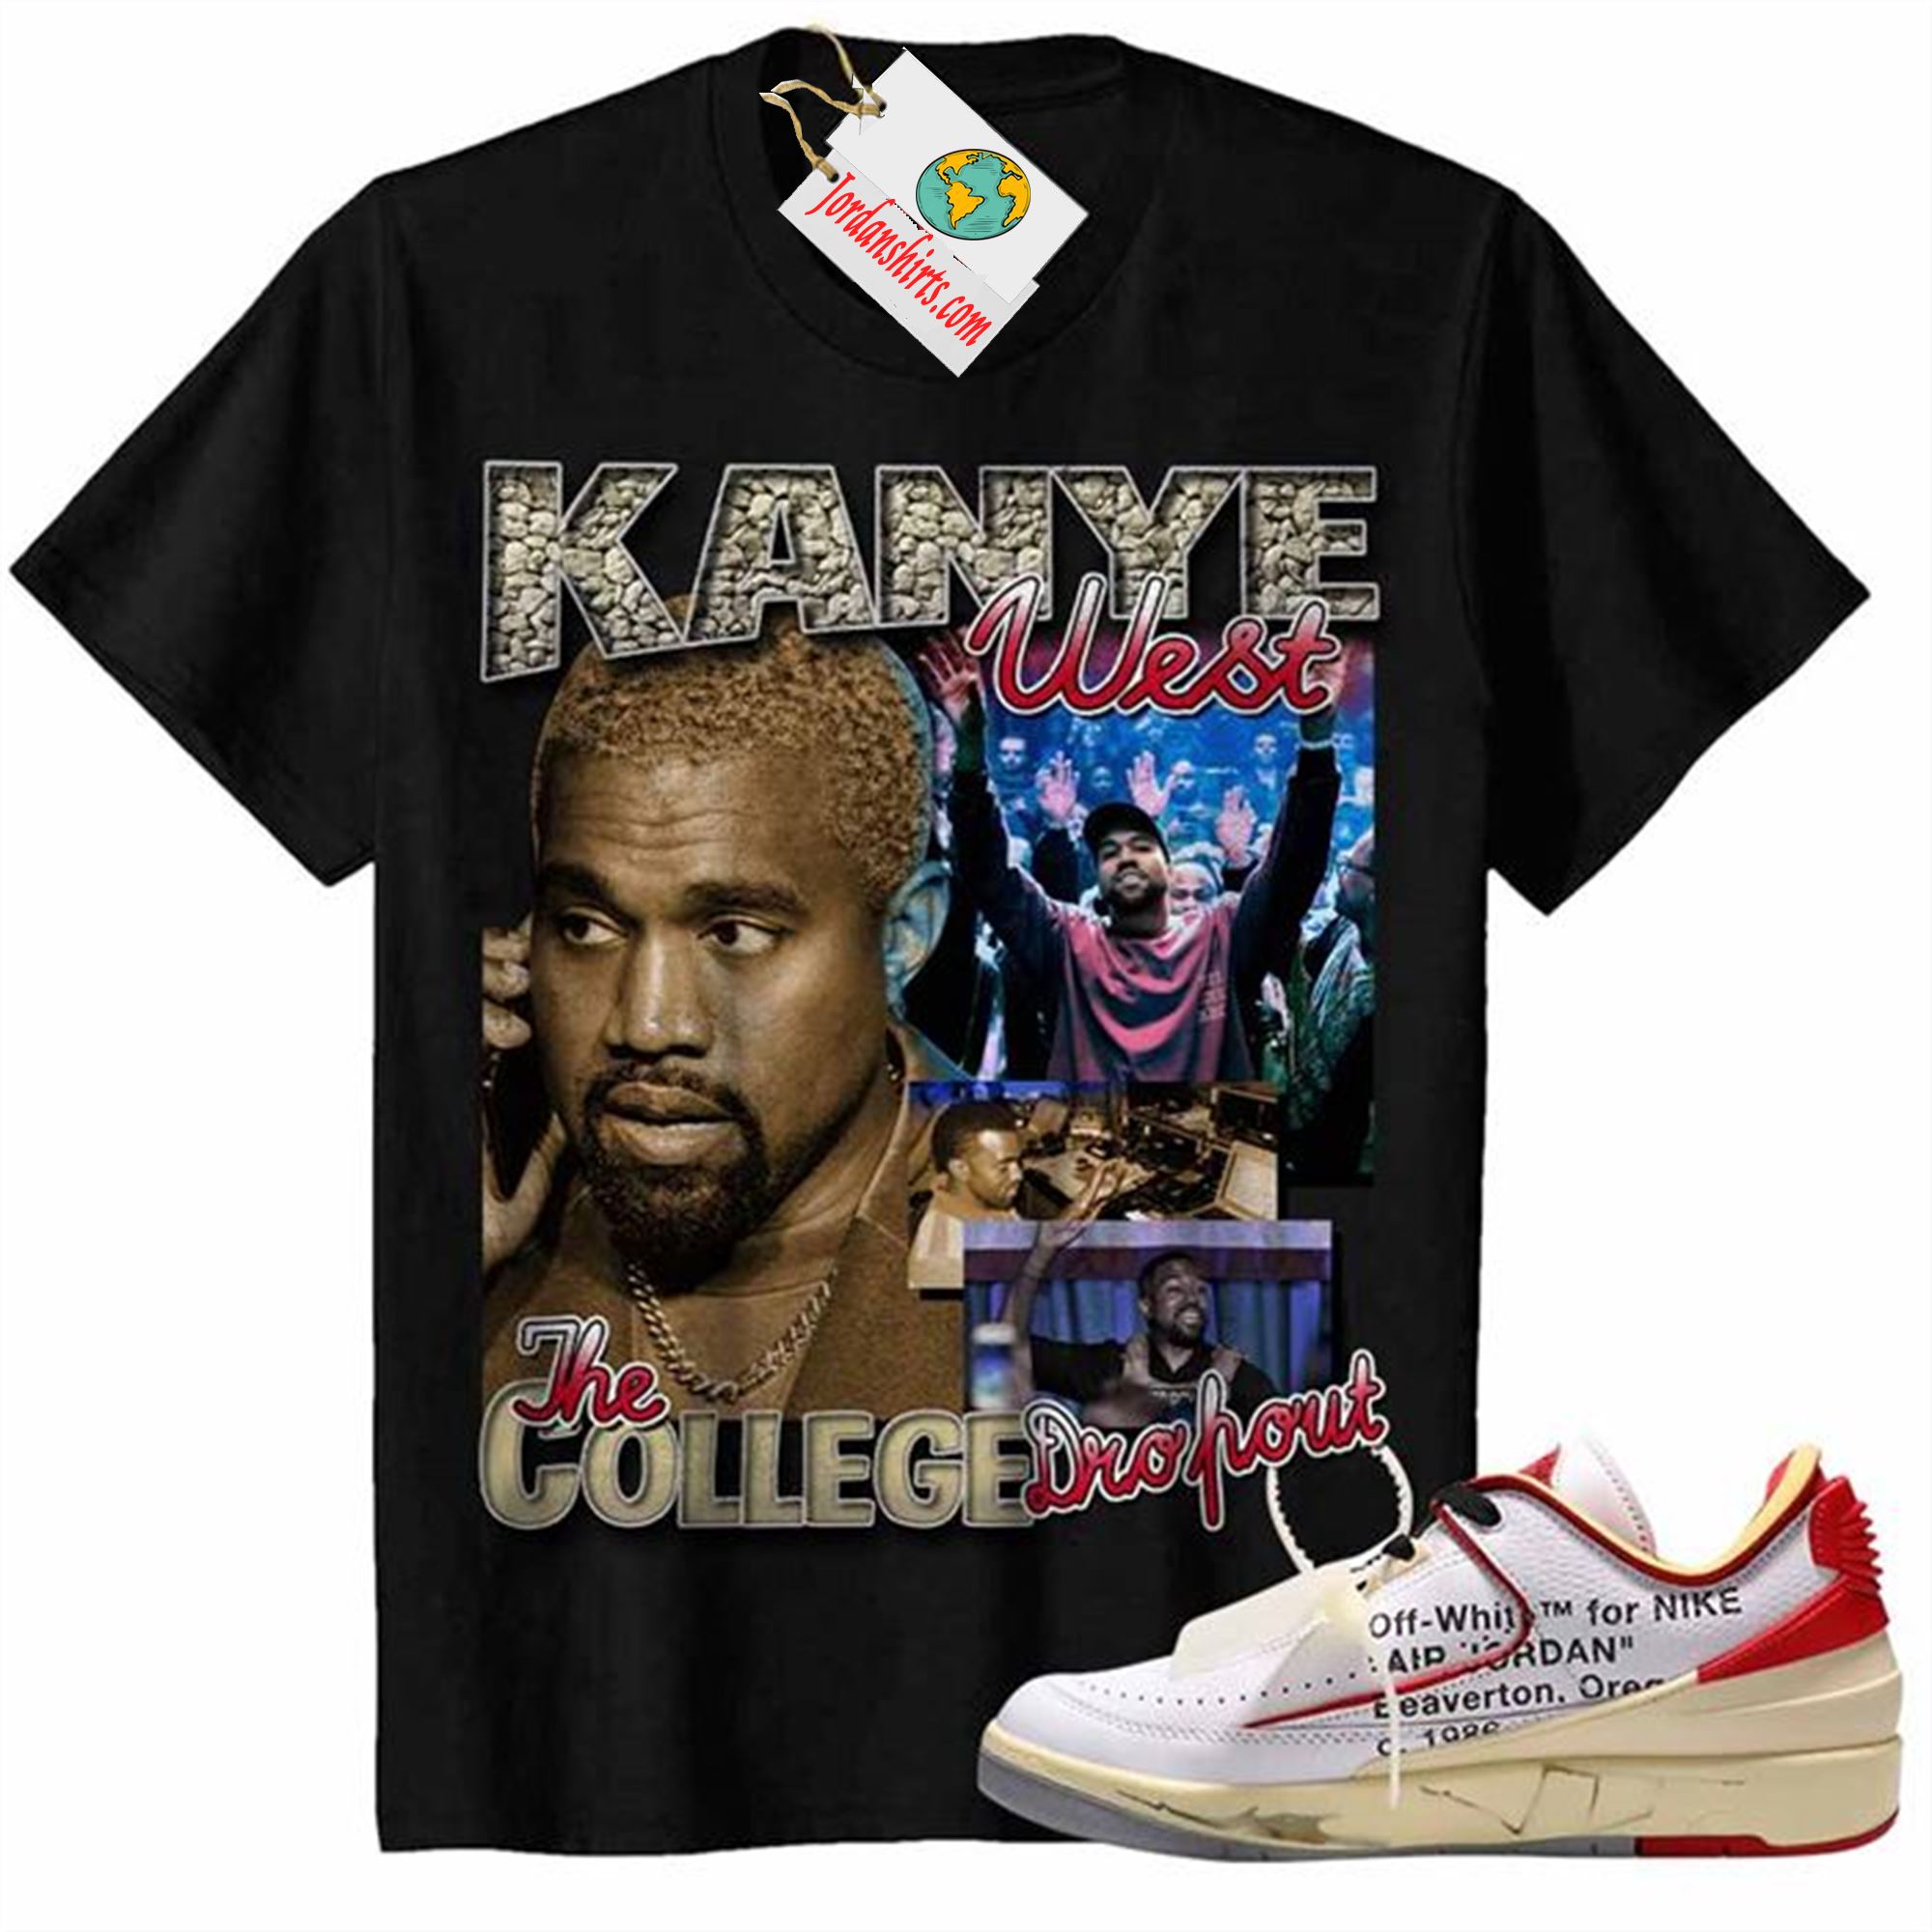 Jordan 2 Shirt, Kanye West The College Dropout Black Air Jordan 2 Low White Red Off-white 2s Full Size Up To 5xl